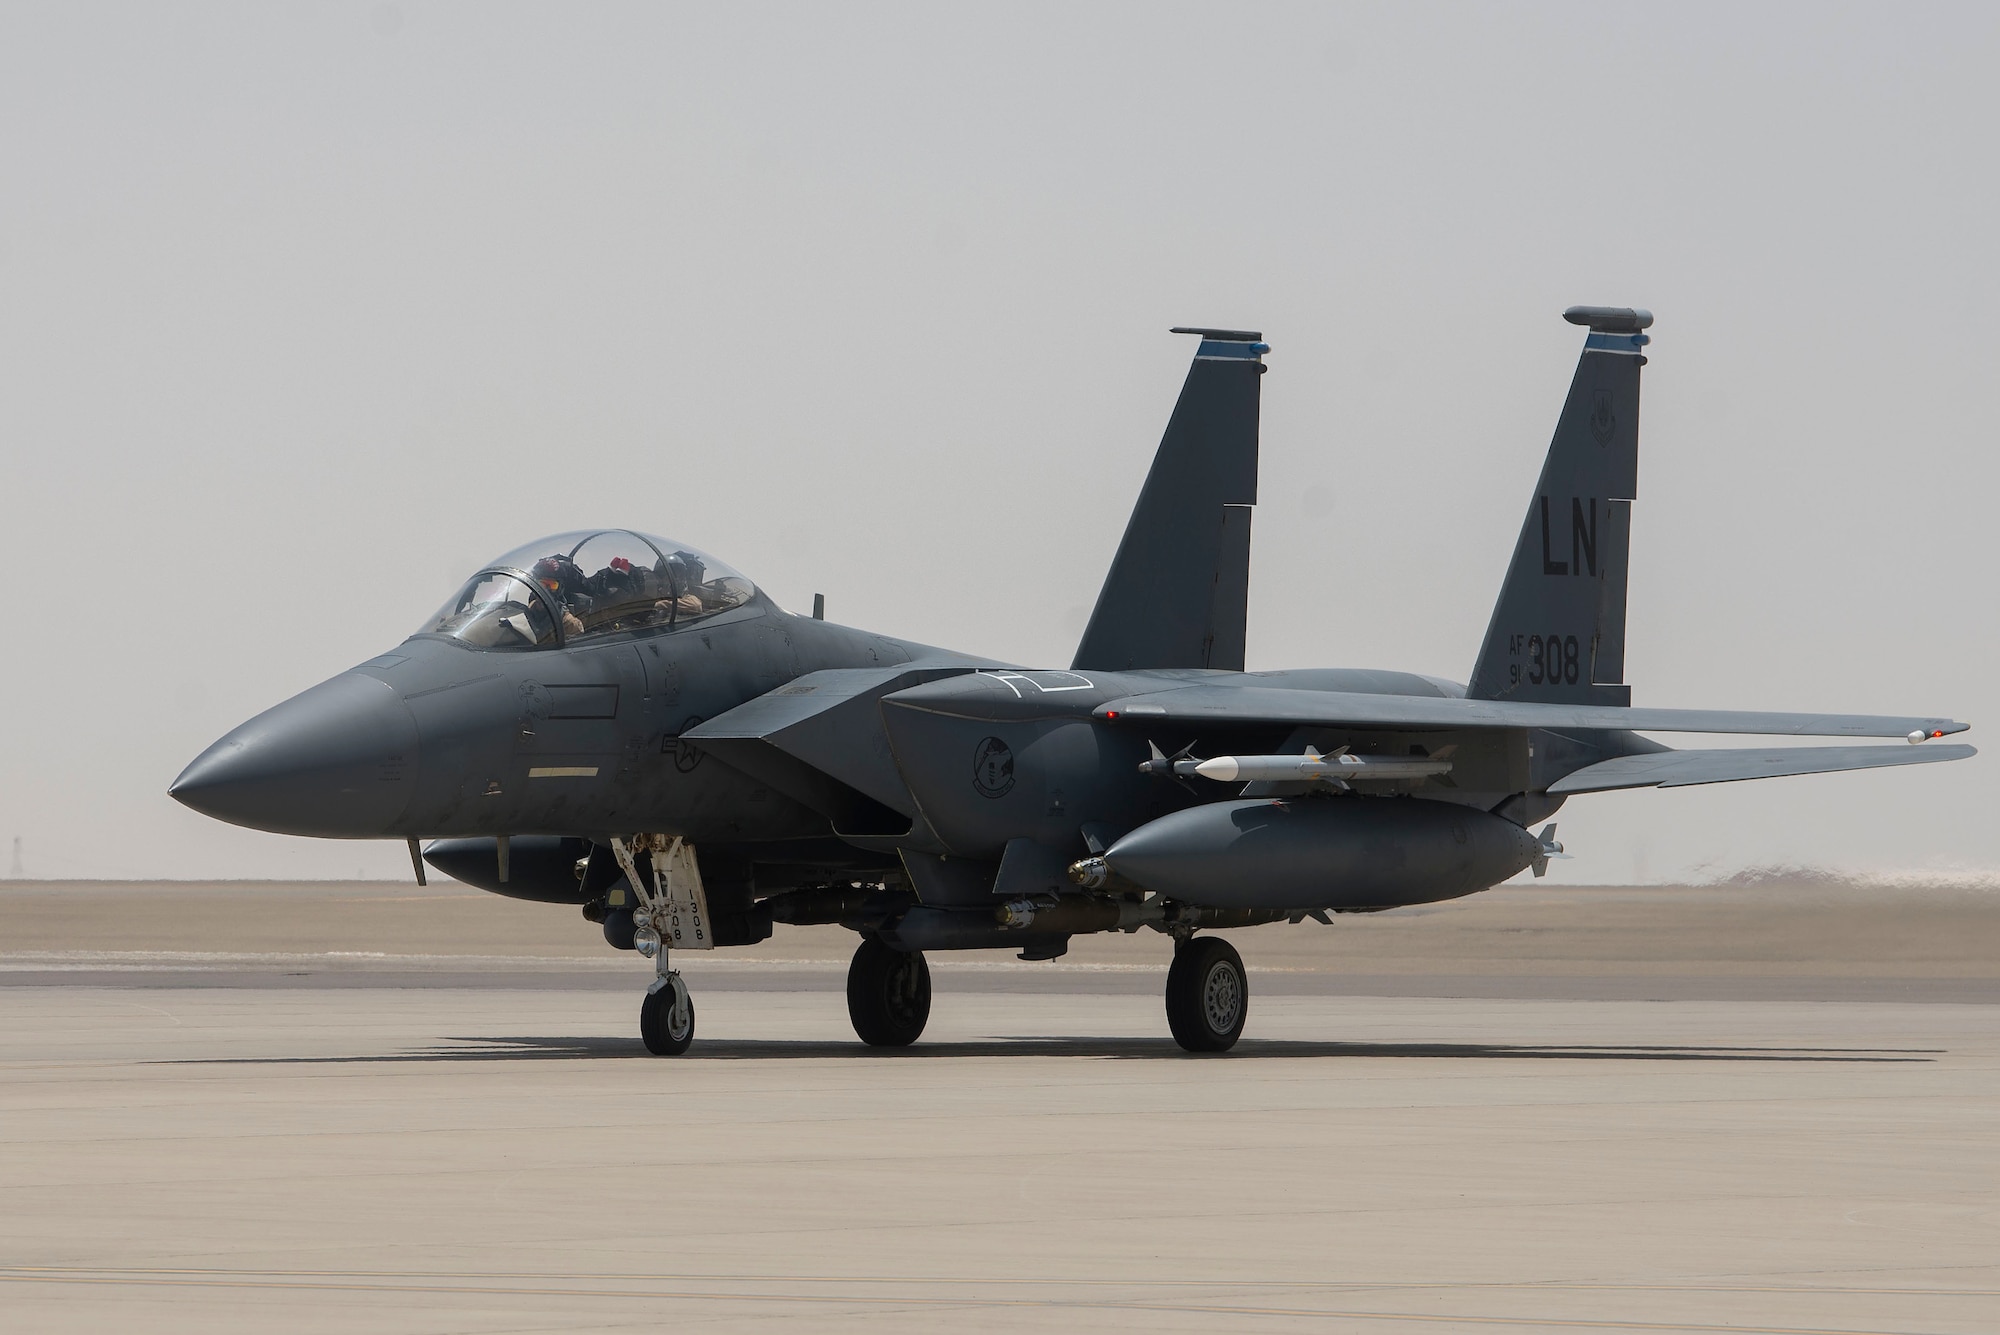 An F-15E Strike Eagle piloted by a member of the 494th Expeditionary Fighter Squadron (EFS) taxis on the flightline after landing at Al Dhafra Air Base, United Arab Emirates, April 25, 2021. The fighter aircraft arrived with a modified munitions configuration, enabling the jet to carry double the standard munitions load. (U.S. Air Force photo by Staff Sgt. Zade Vadnais)